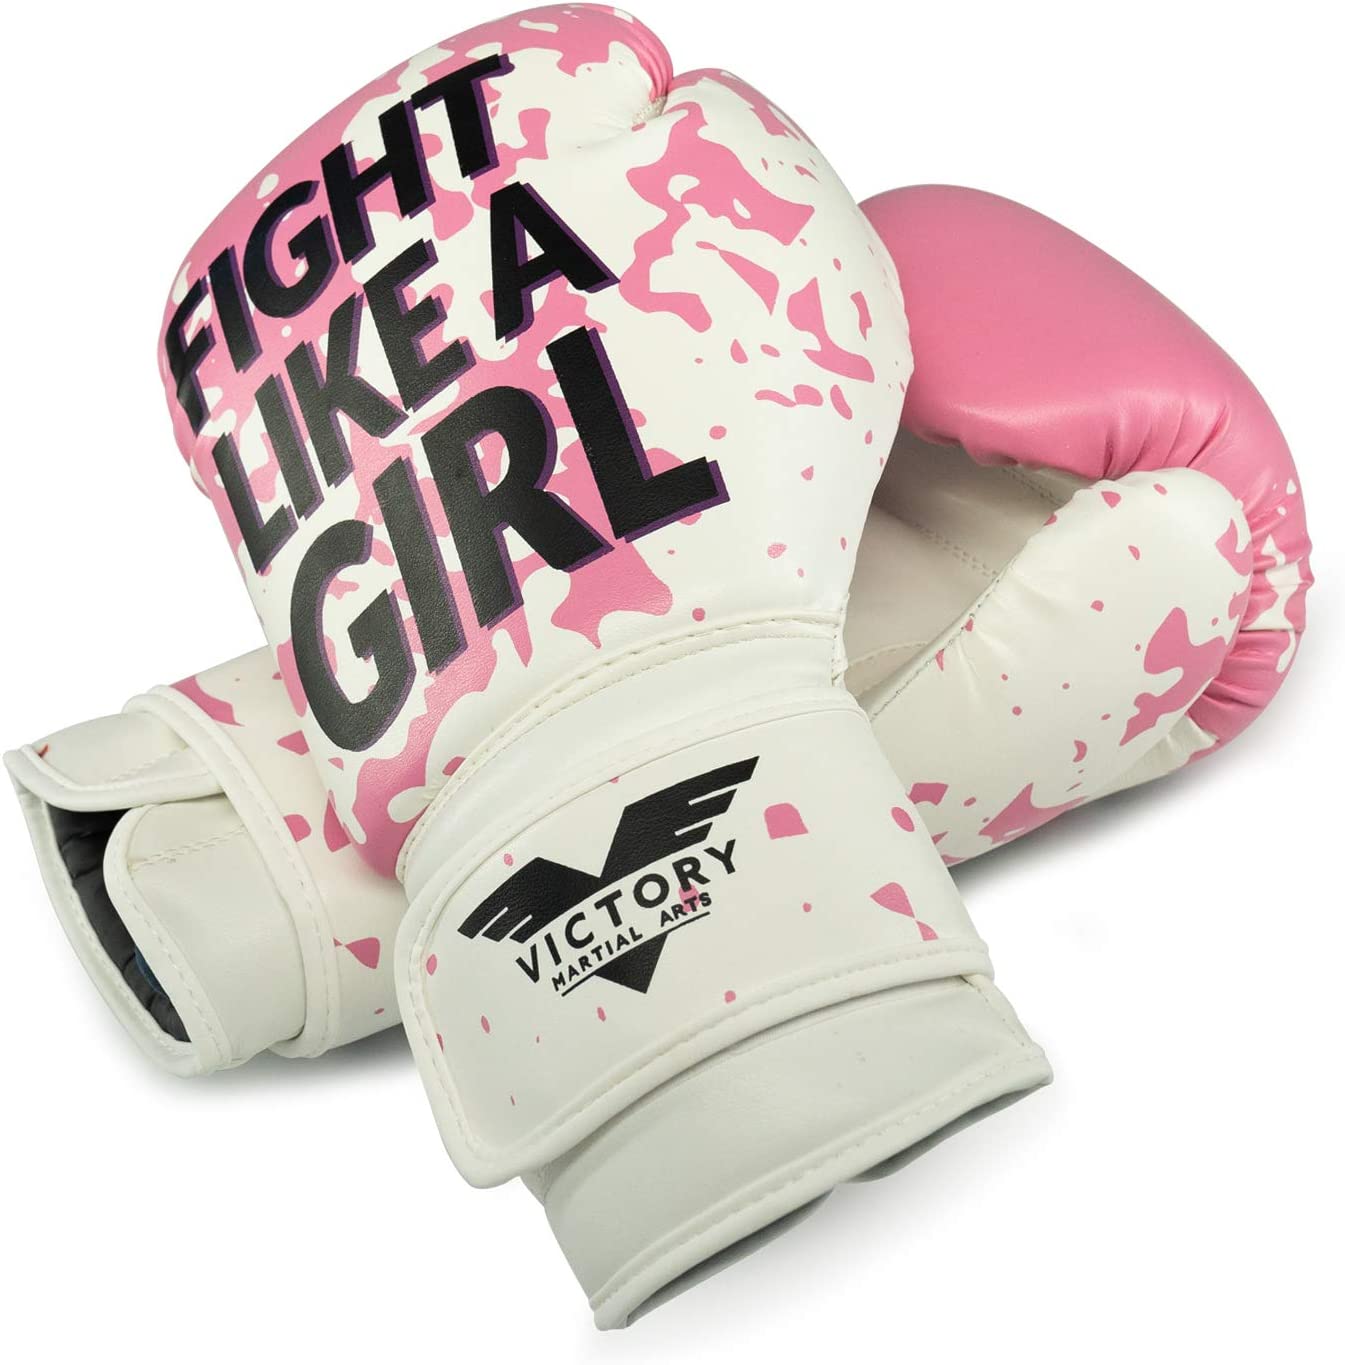 Premium ladies' boxing gloves designed for serious female boxers by Victory Martial Arts. Crafted with top-quality materials, these gloves offer excellent protection, comfort, and durability. Perfect for sparring sessions and intense boxing workouts.